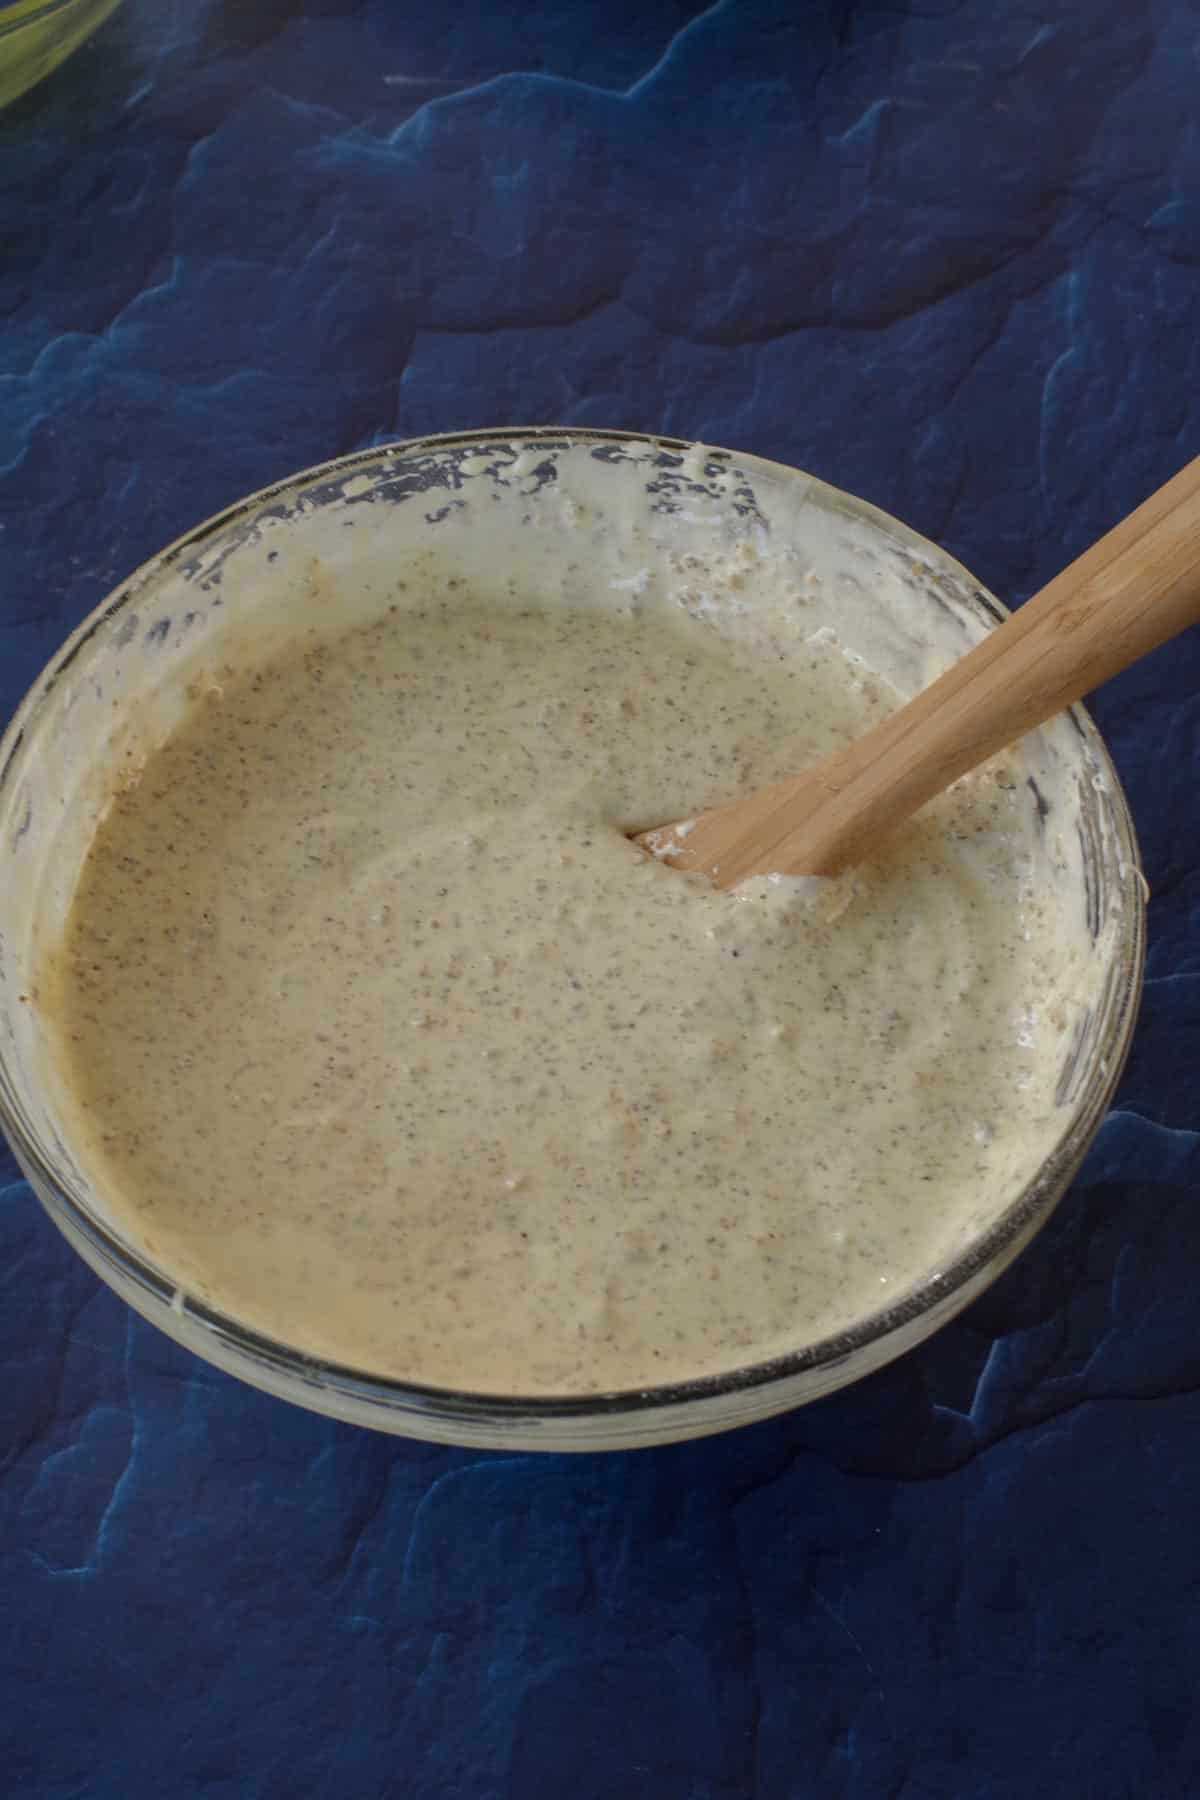 walnuts and bread crumbs mixed well into yolk mixture in a glass bowl with wooden spoon